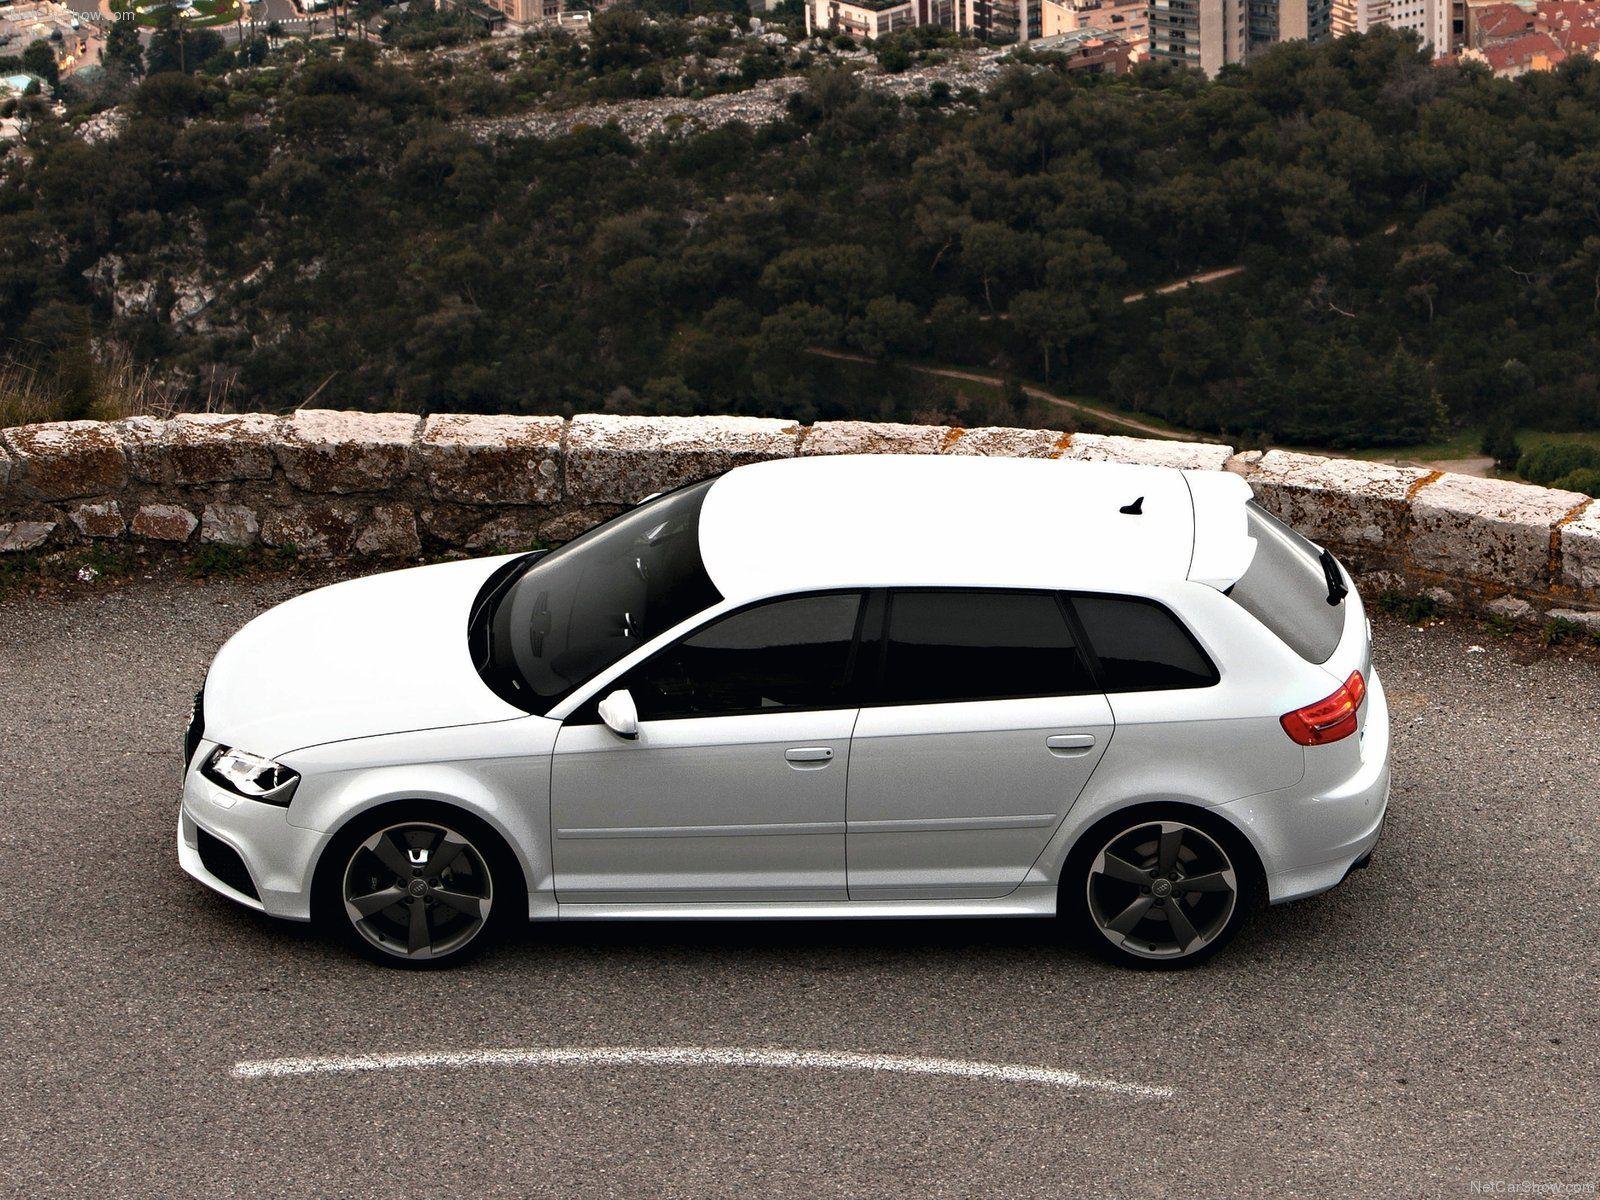 Audi RS3 Sportback picture. Audi photo gallery